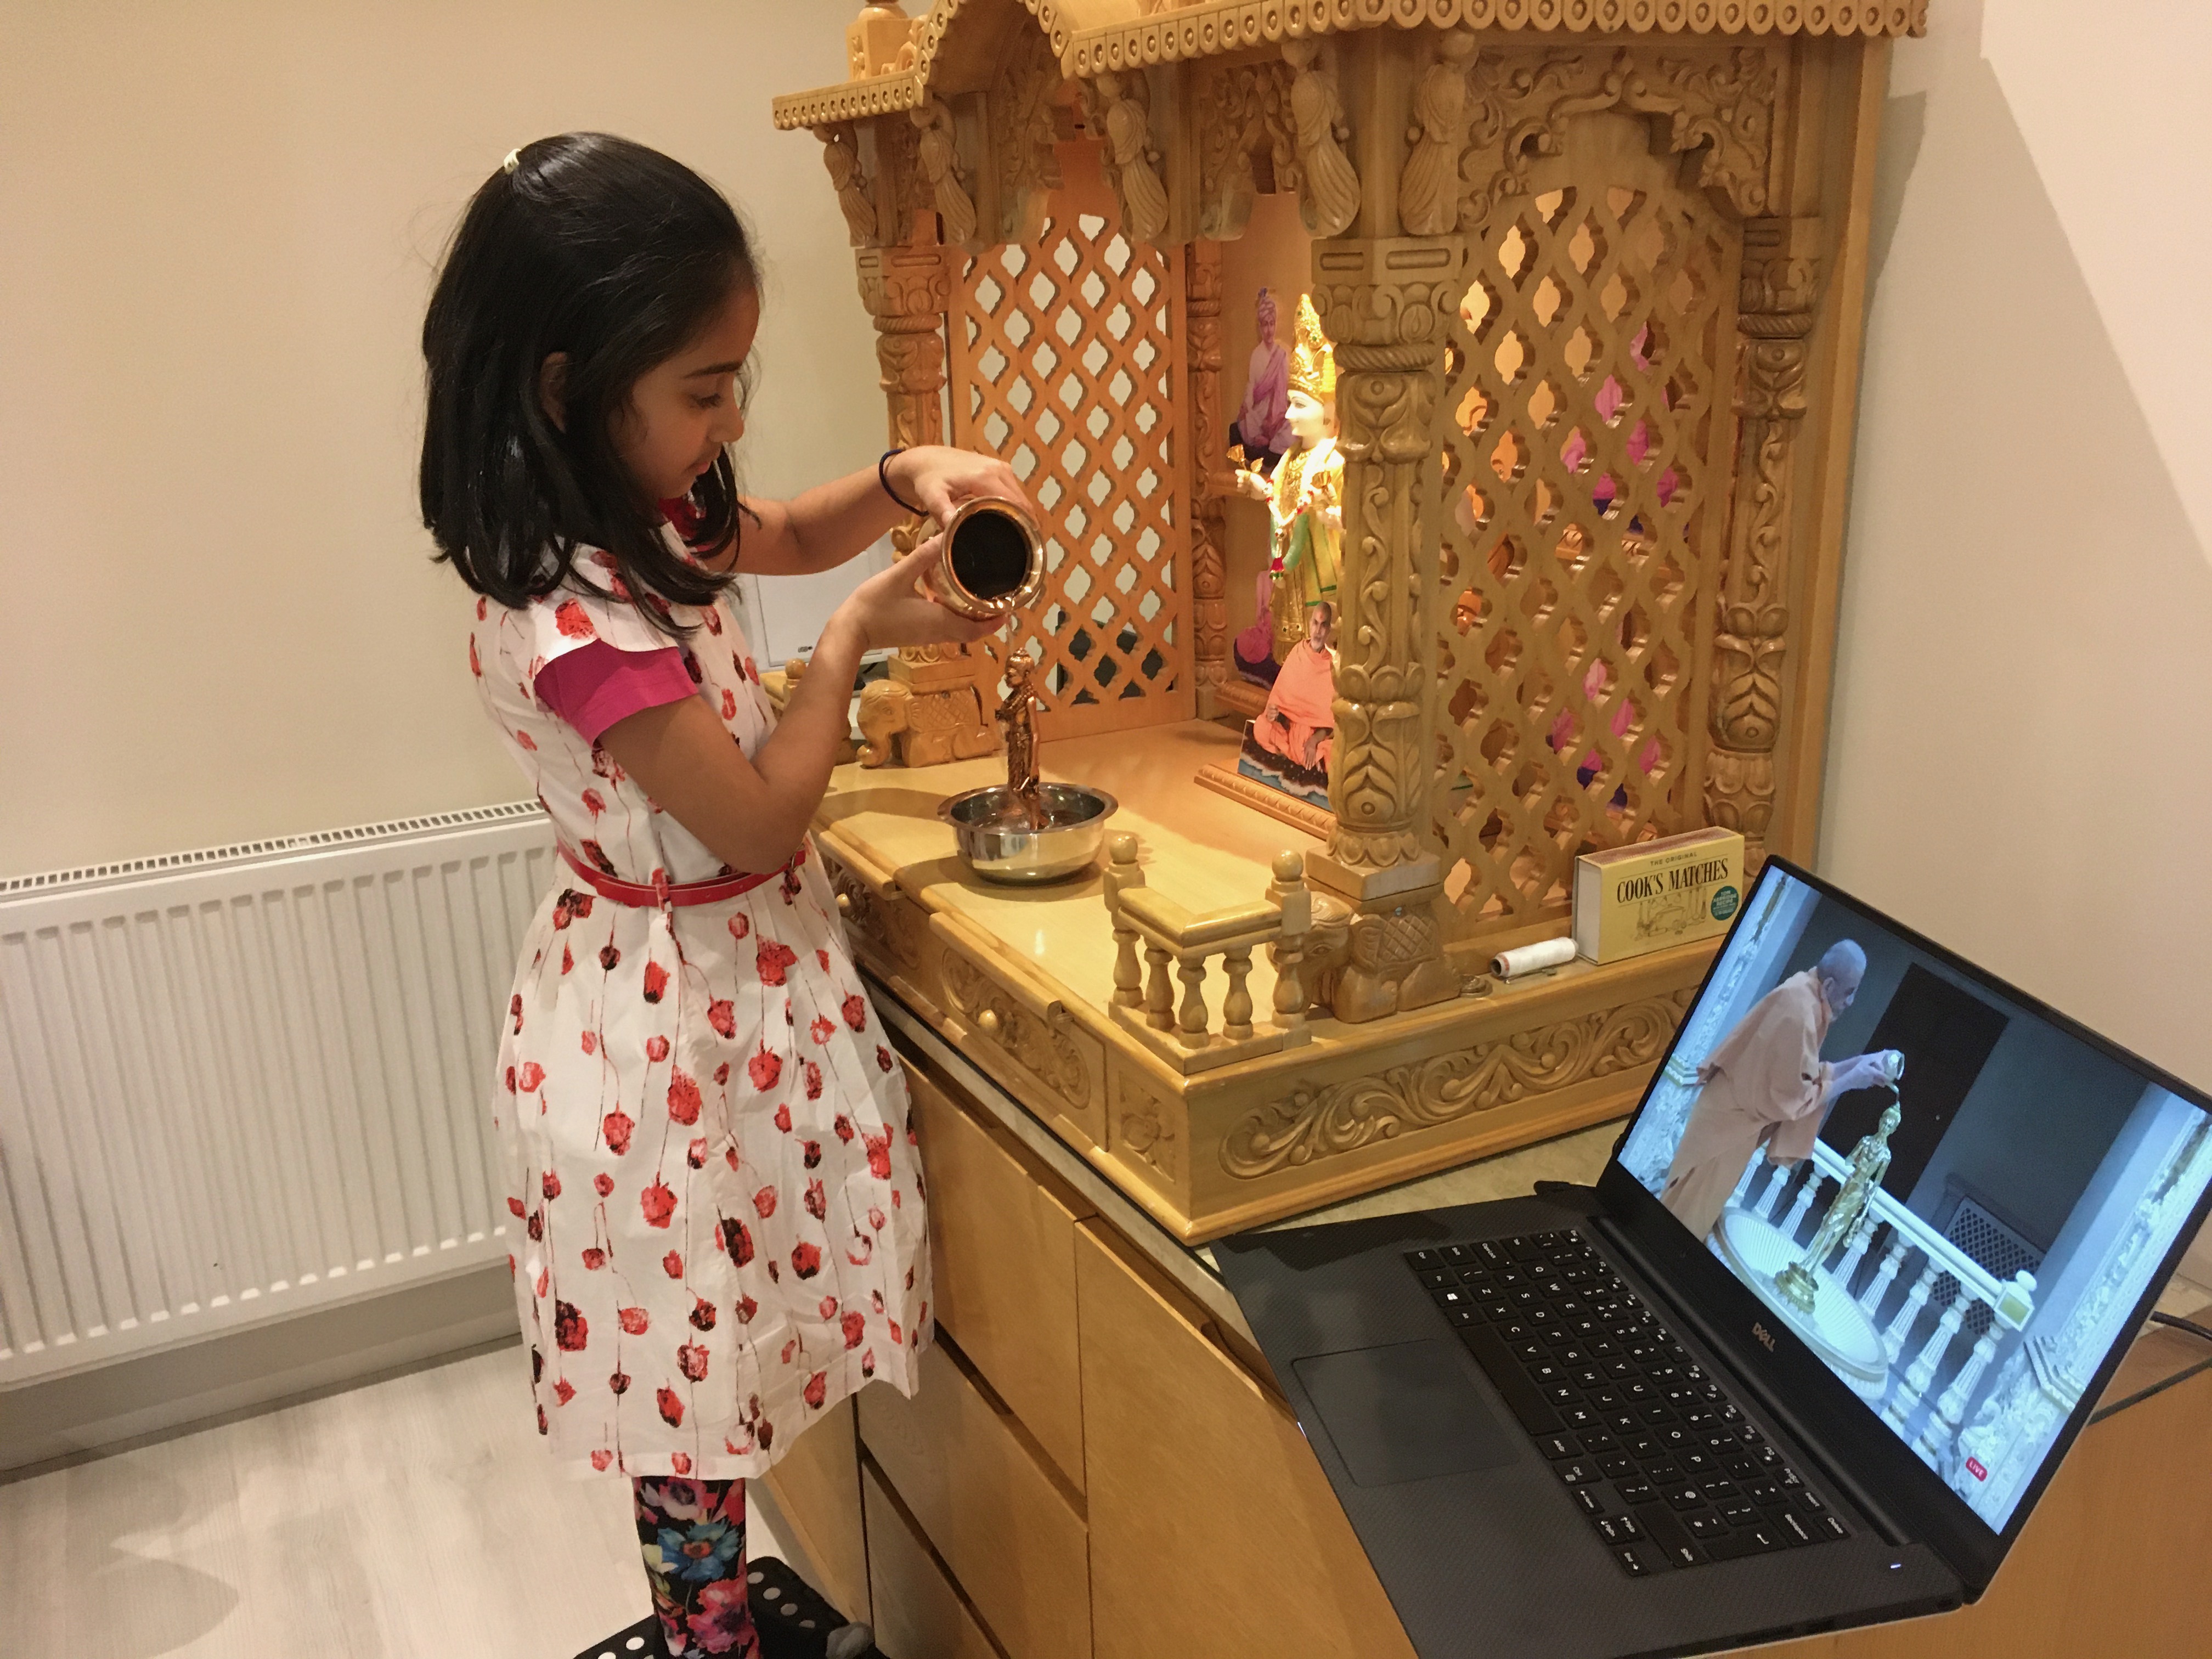 How technology and faith are helping Hindus in Britain through Covid-19